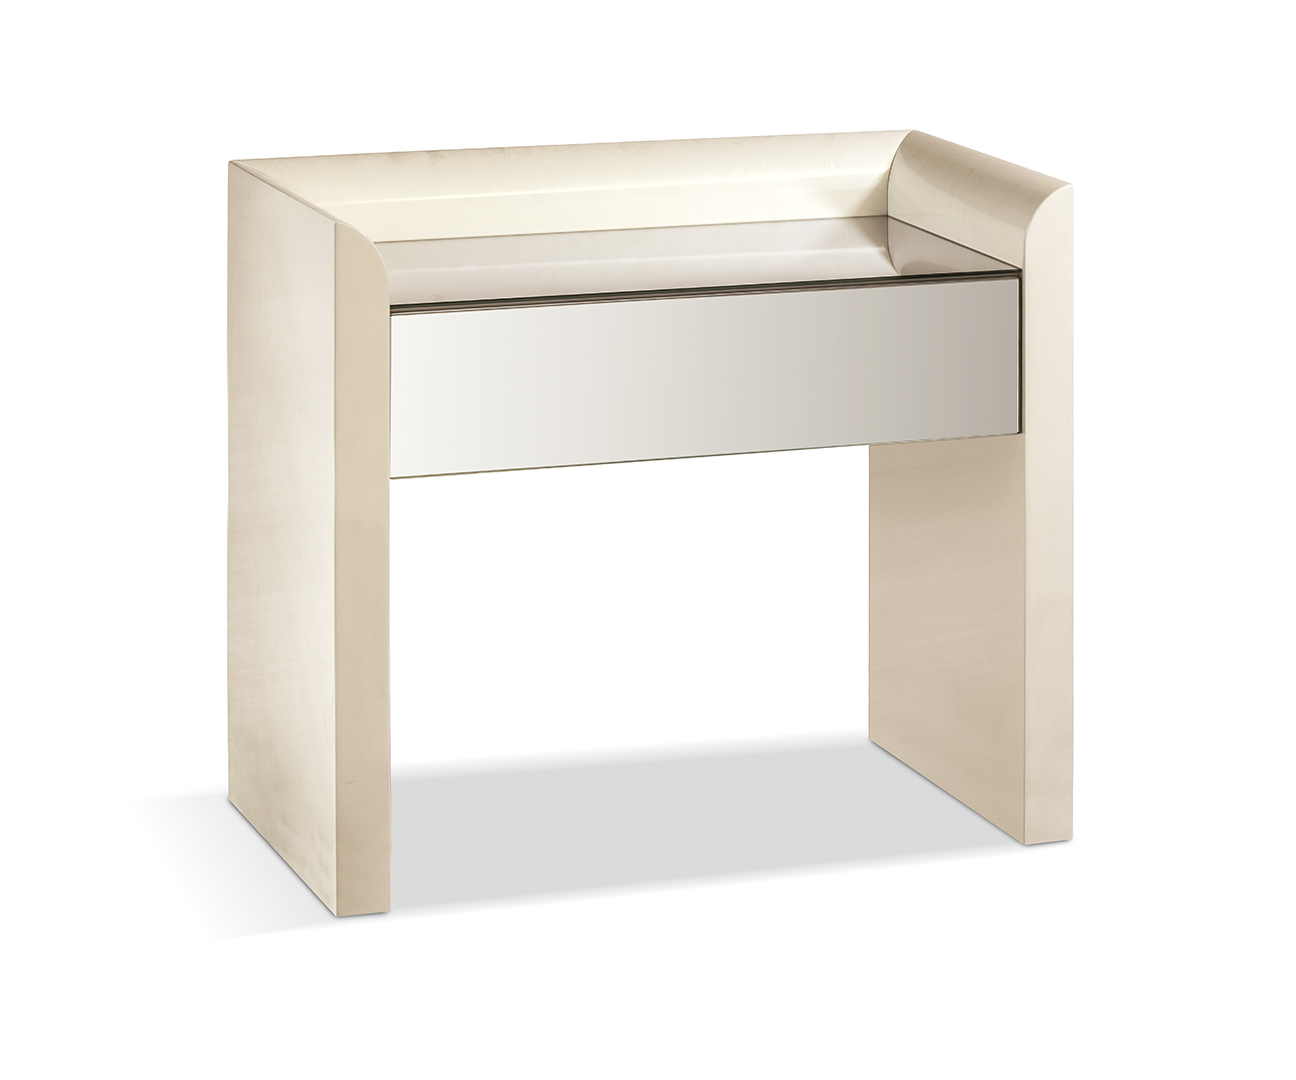 Vieste bed side table - Cantori